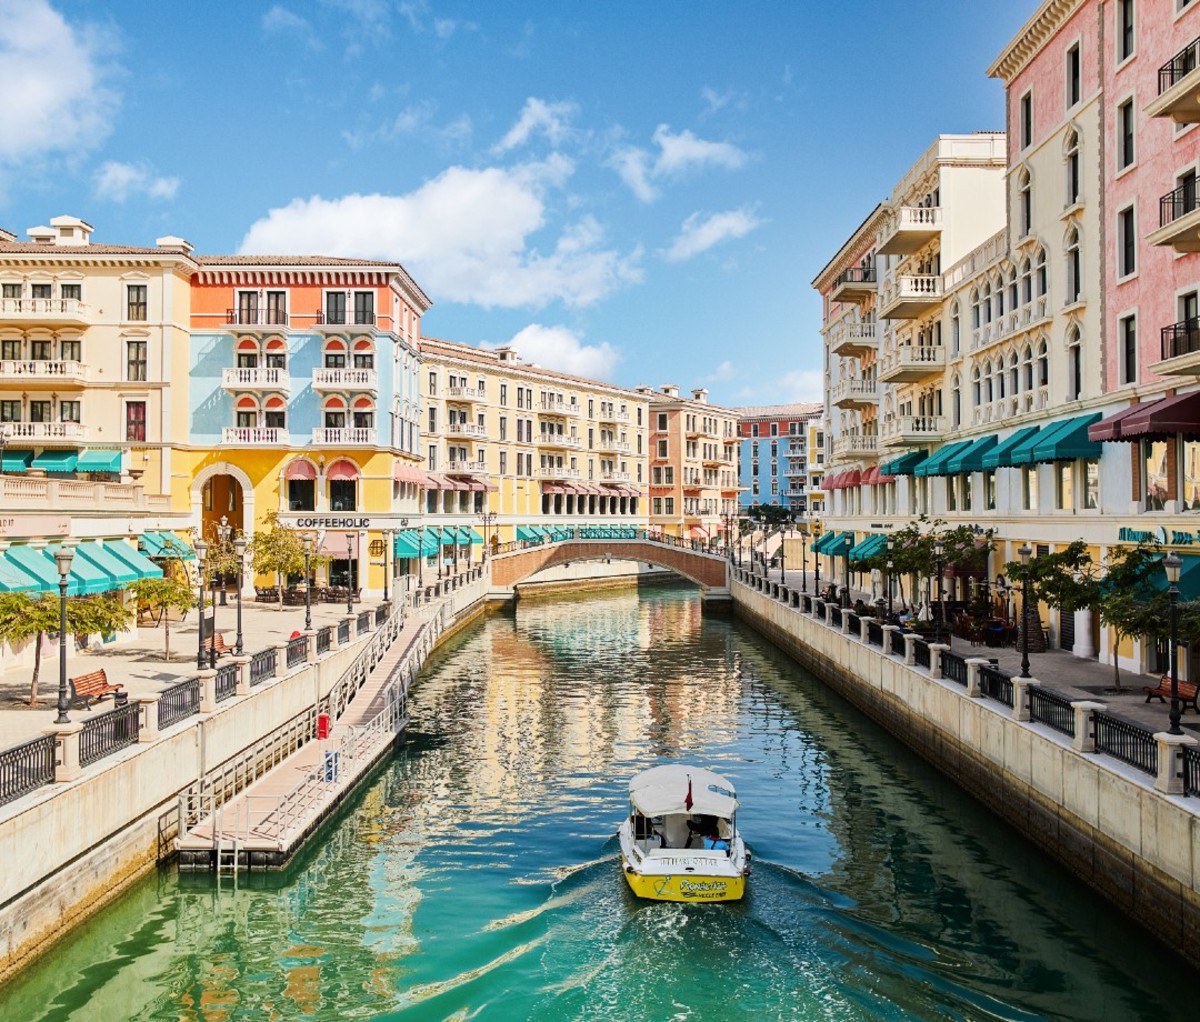 Artificial canal in Qatar with colorful buildings on either side